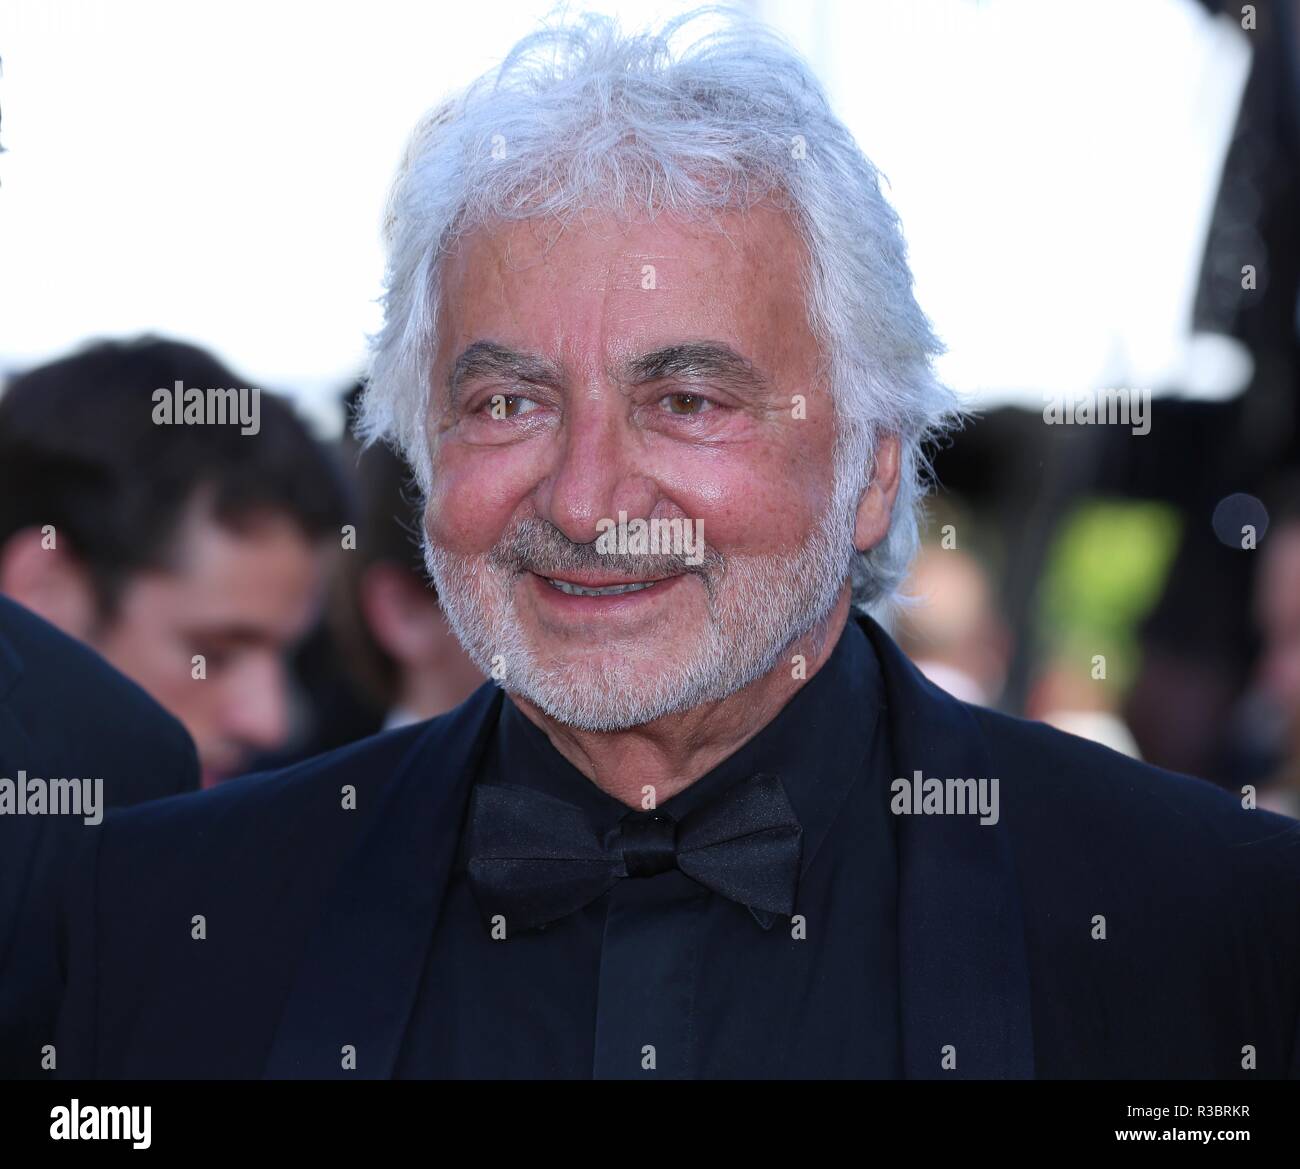 CANNES, FRANCE – MAY 17, 2018: Franck Provost attends the screening of 'Capharnaum' at the Festival de Cannes (Ph: Mickael Chavet) Stock Photo